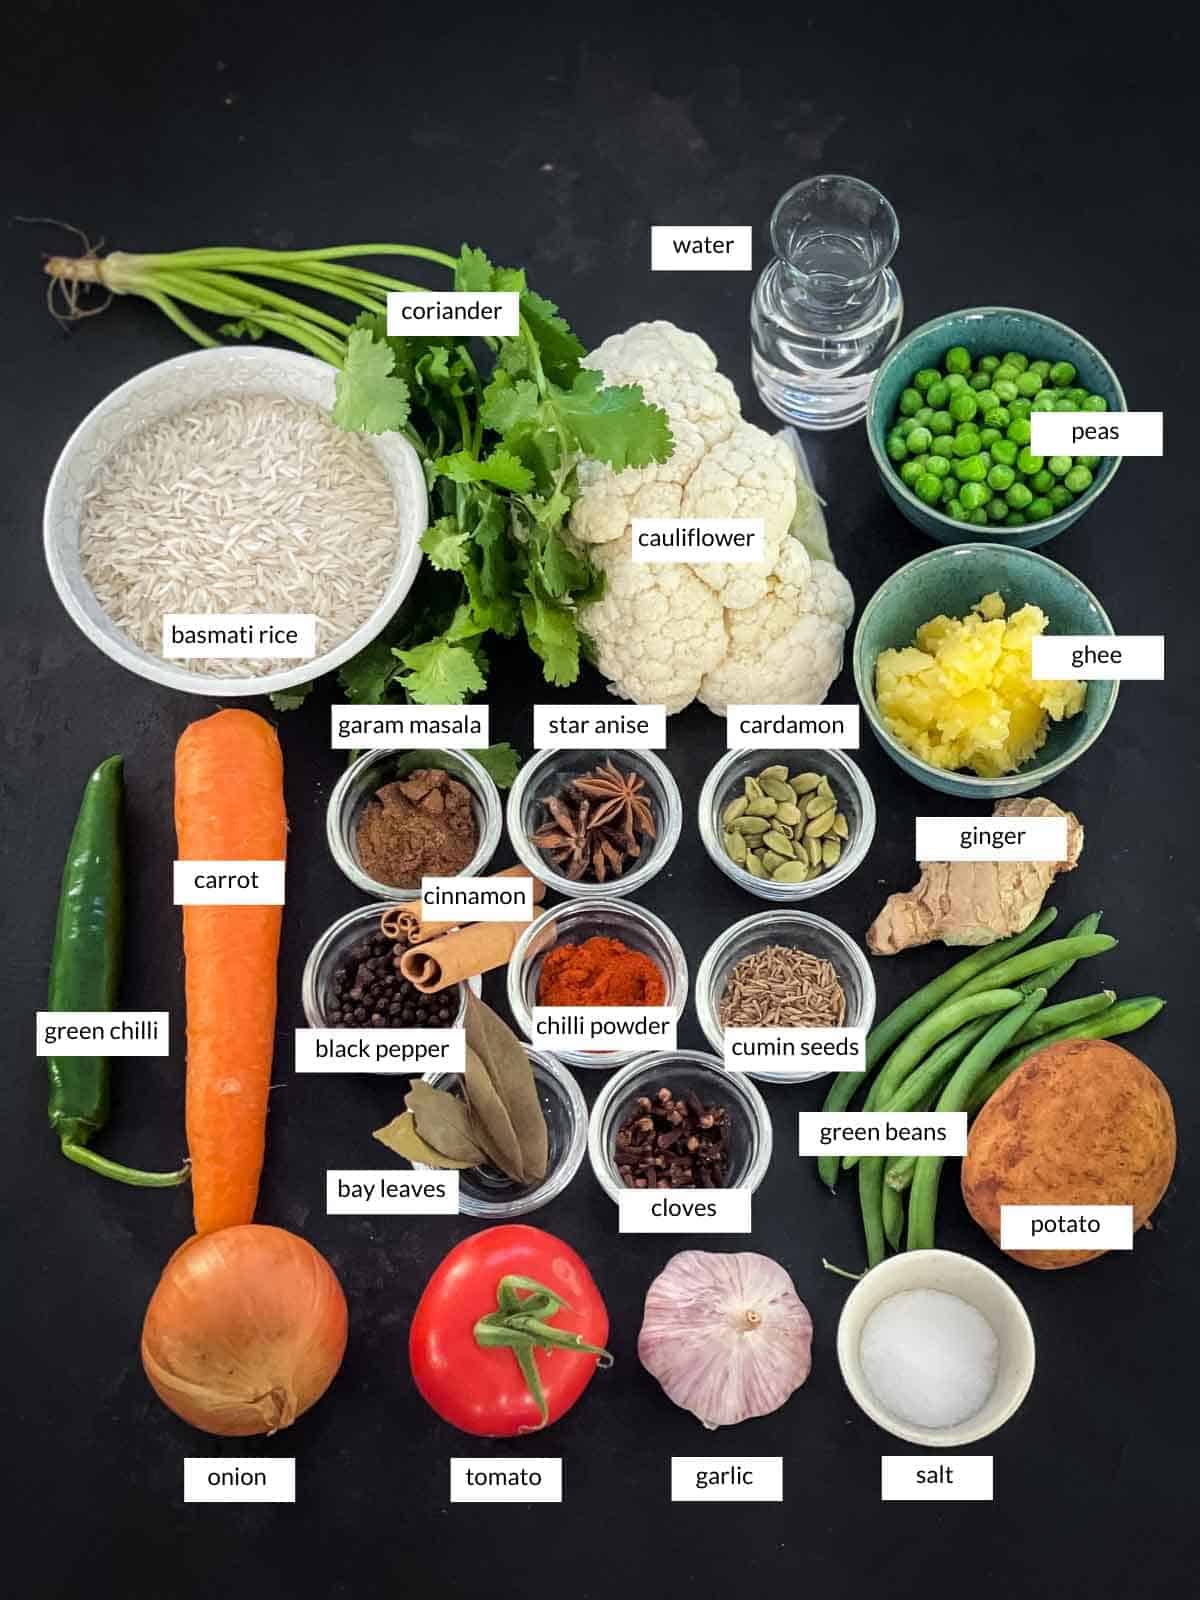 Individually labelled ingredients for Veg Pulao (Easy Indian Rice Dish)